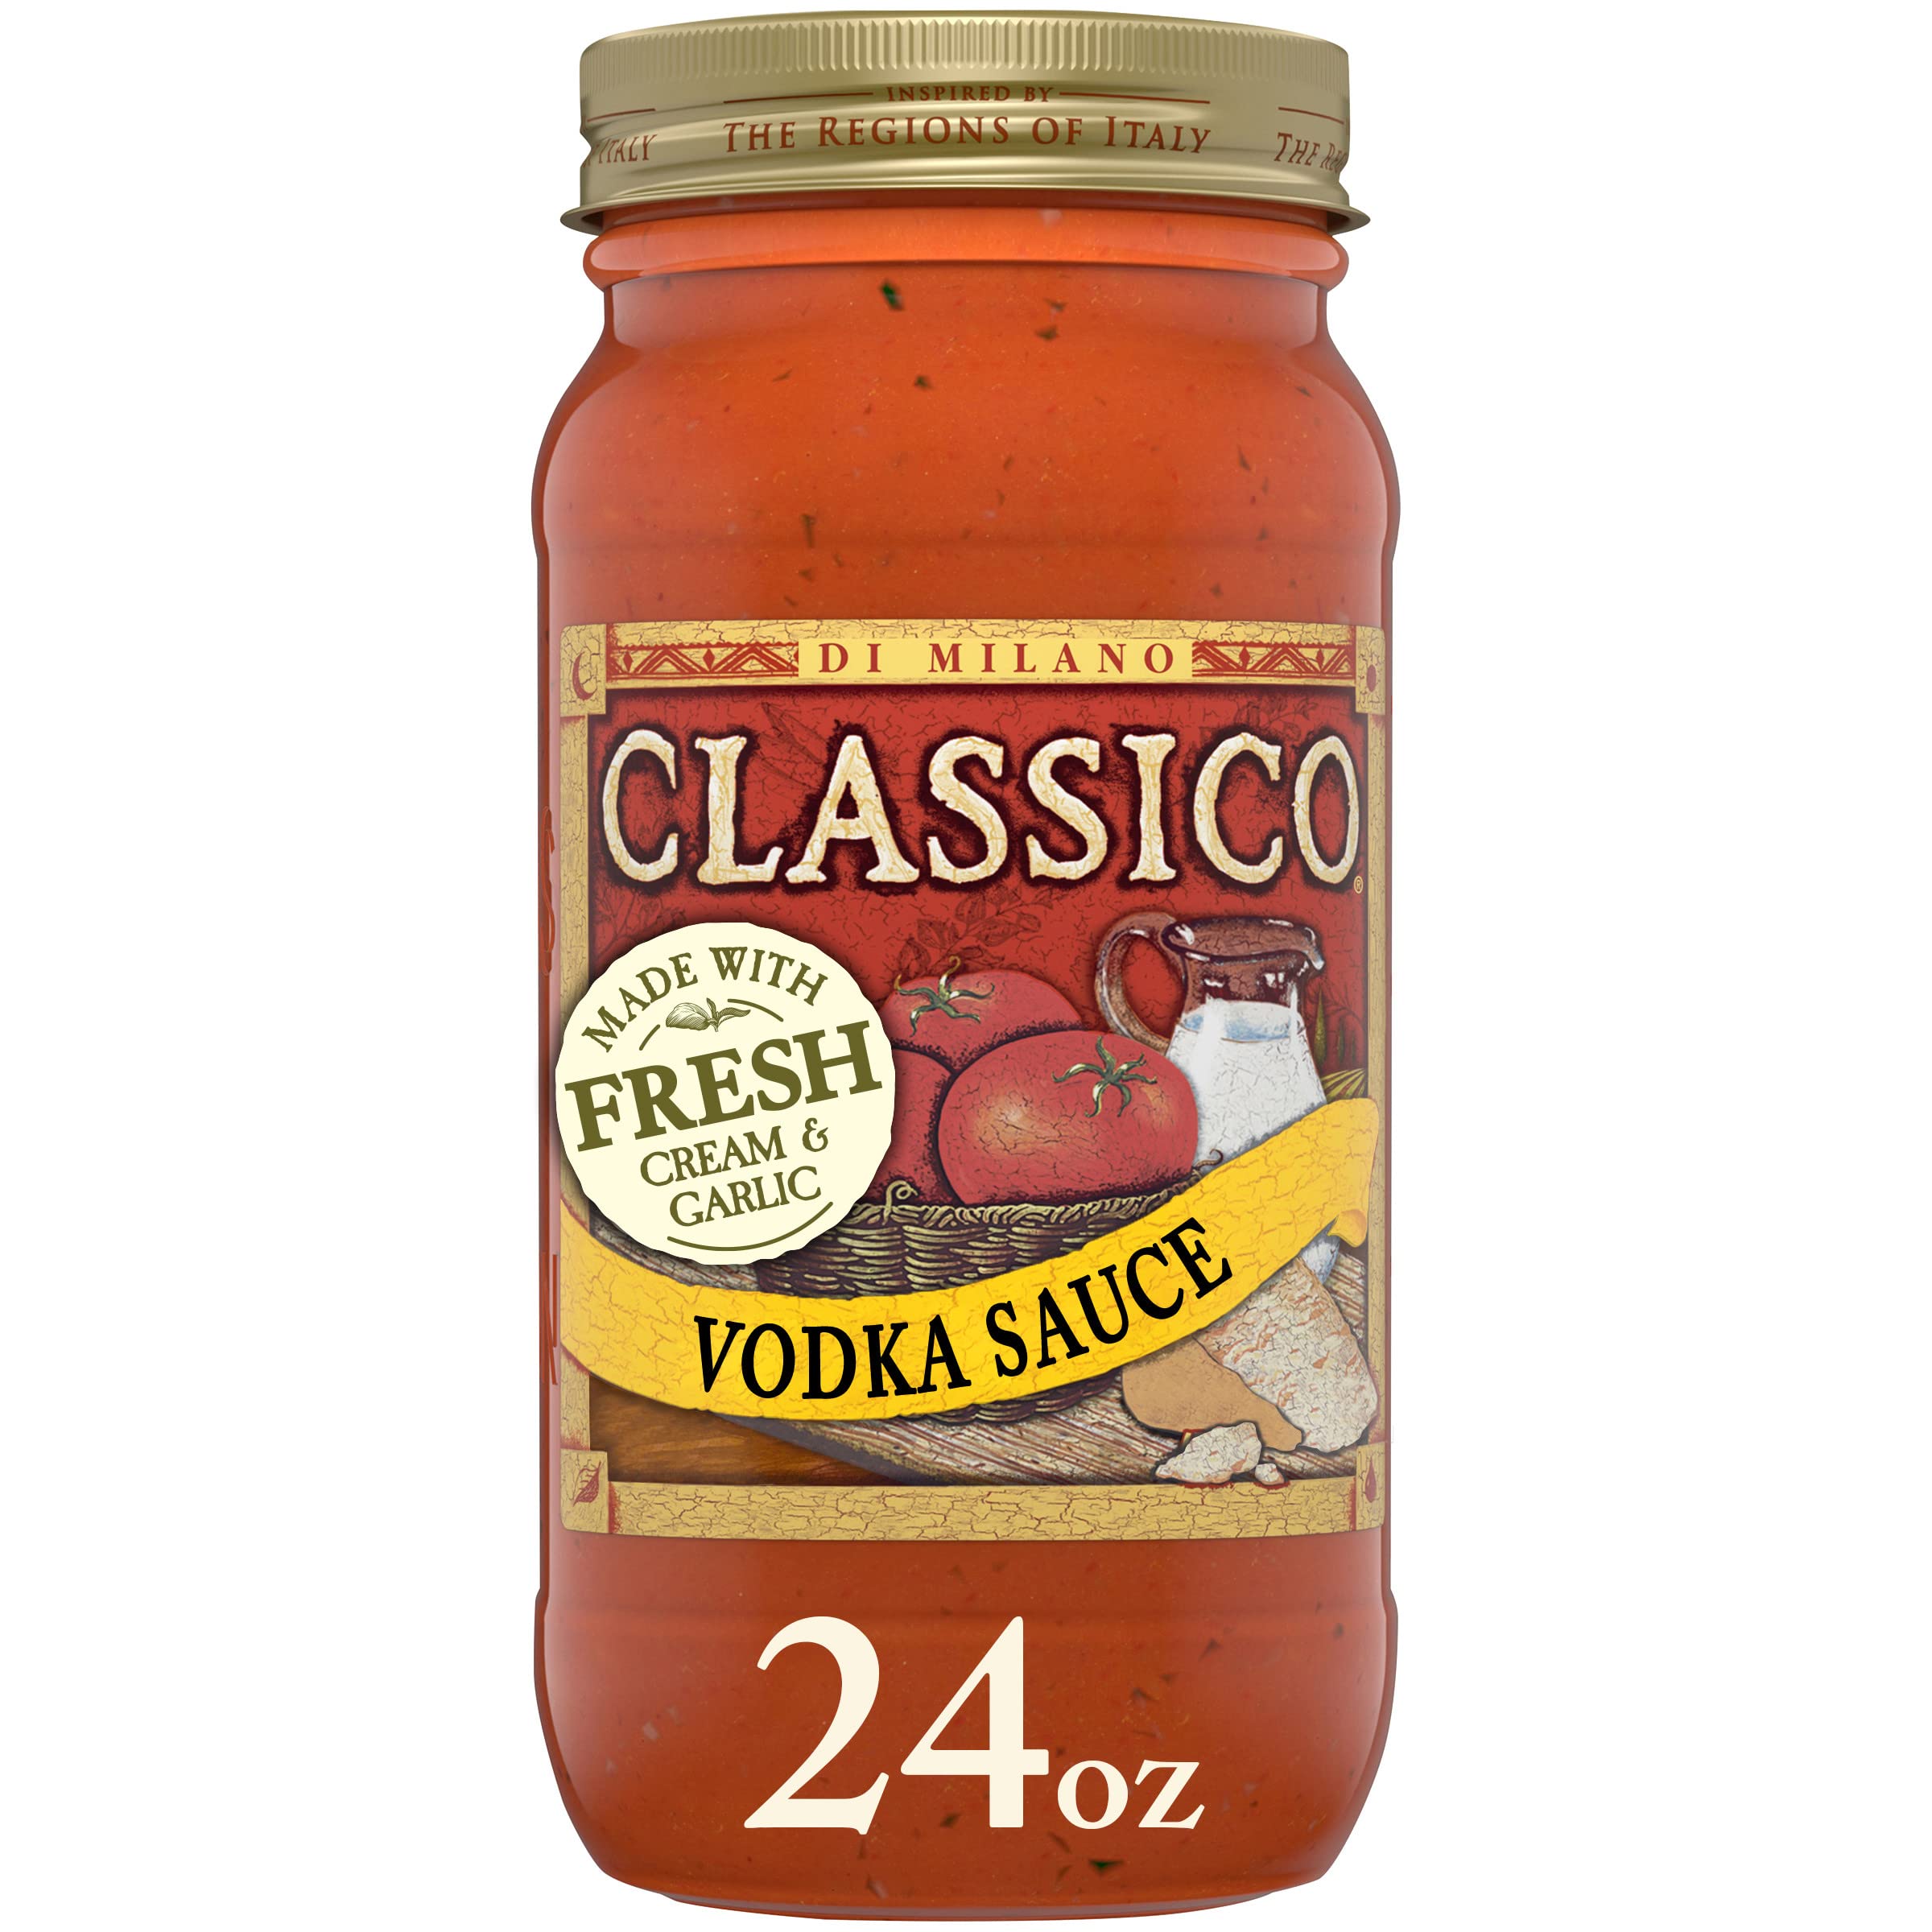 24-Oz Classico Vodka Pasta Sauce $2.08 w/ S&S + Free Shipping w/ Prime or on orders over $35